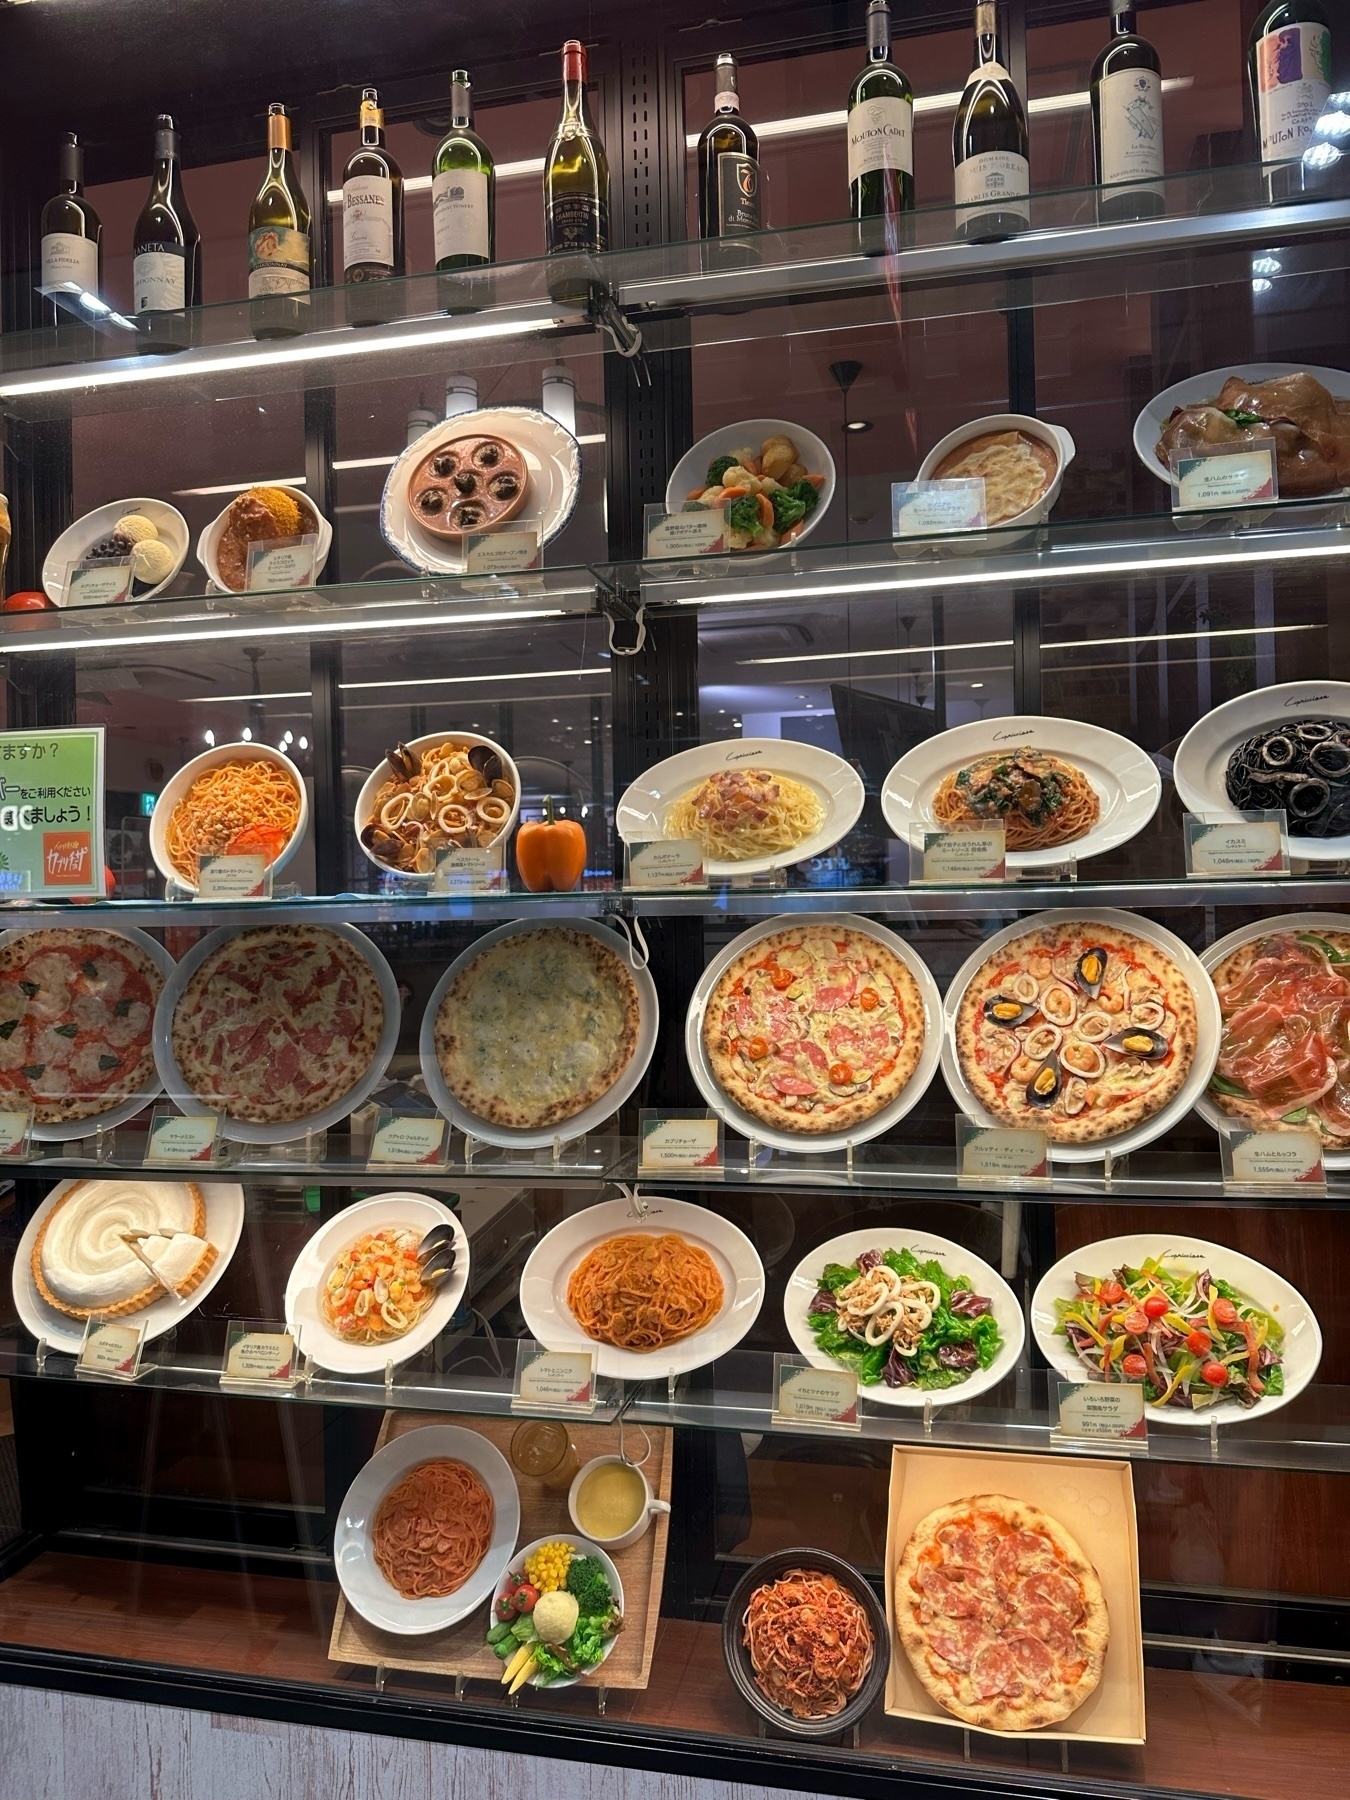 Display of various Italian dishes including pasta, pizza, and salad, alongside bottles of wine at the top shelf, likely in a restaurant or food establishment. Some dishes have descriptive tags in front.